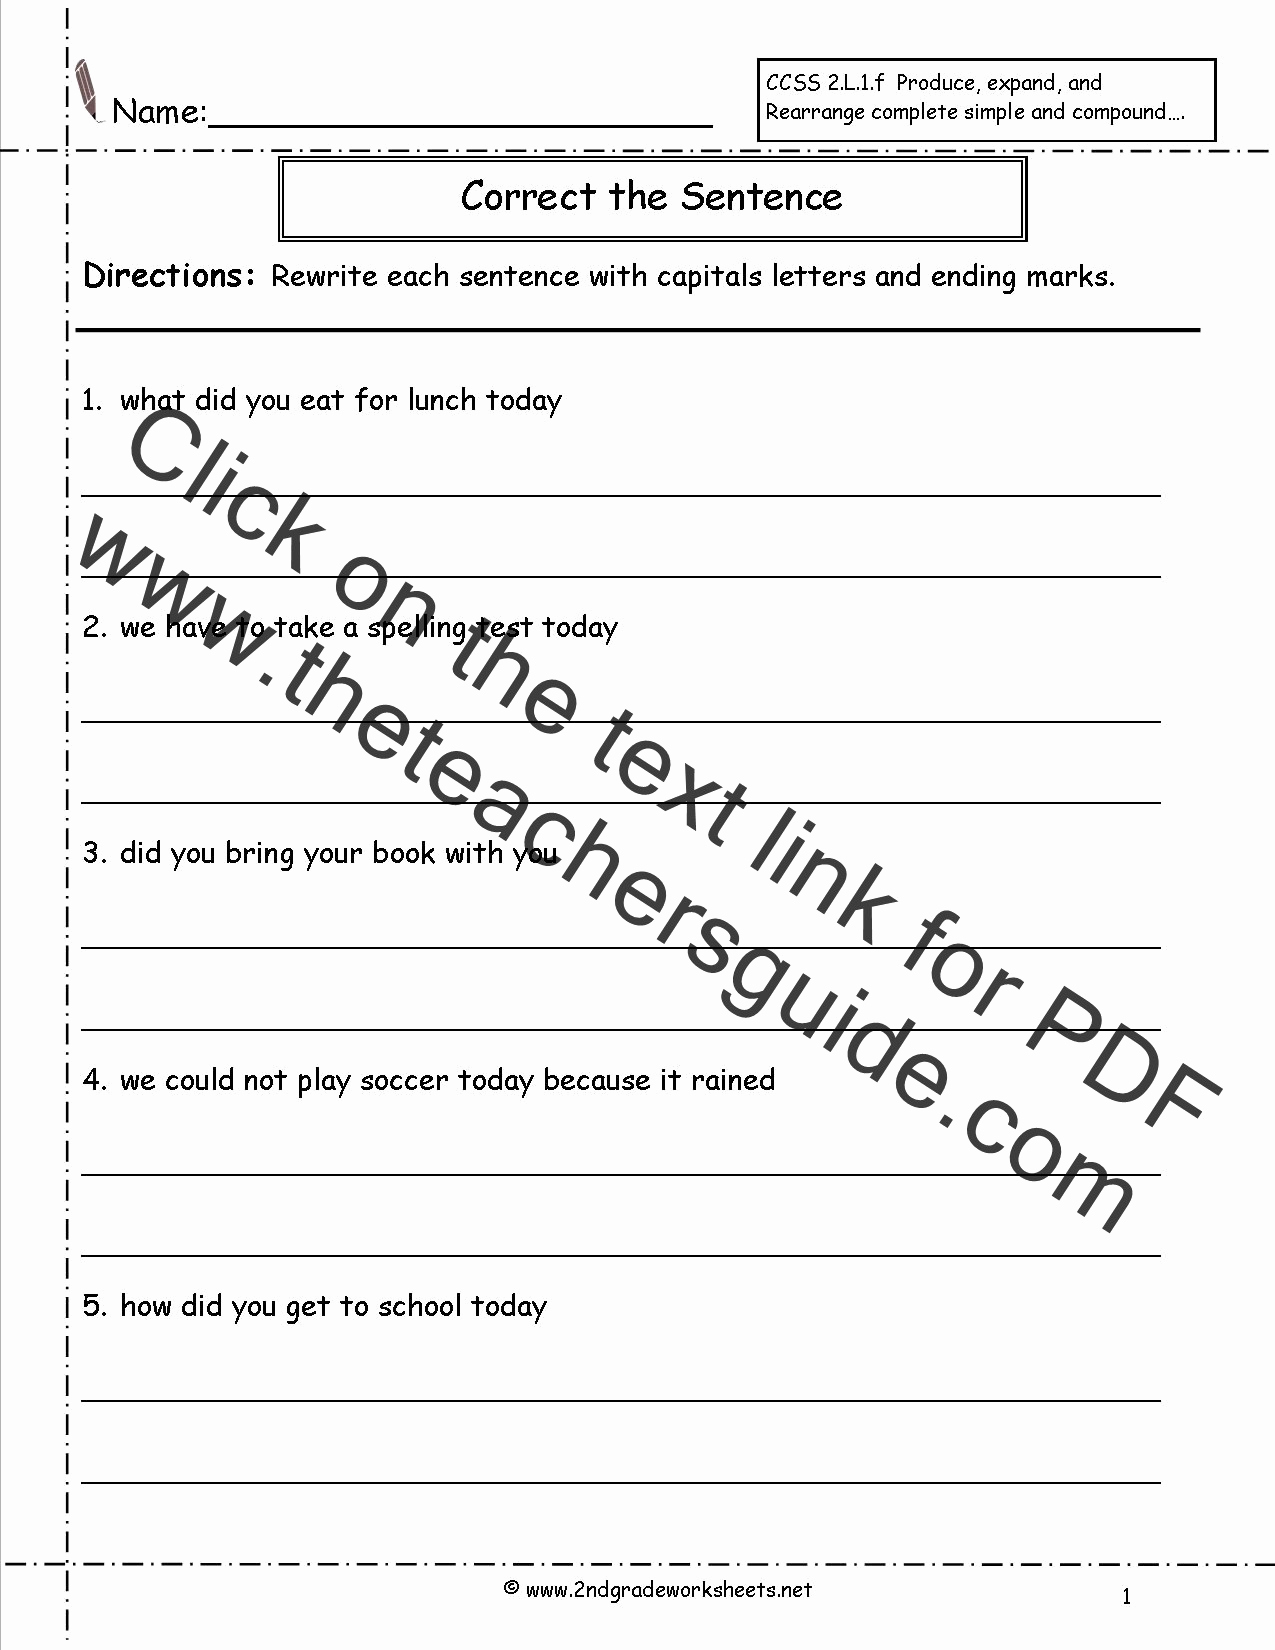 Paragraph Editing Worksheets 4th Grade Lovely 20 Paragraph Editing Worksheets 4th Grade